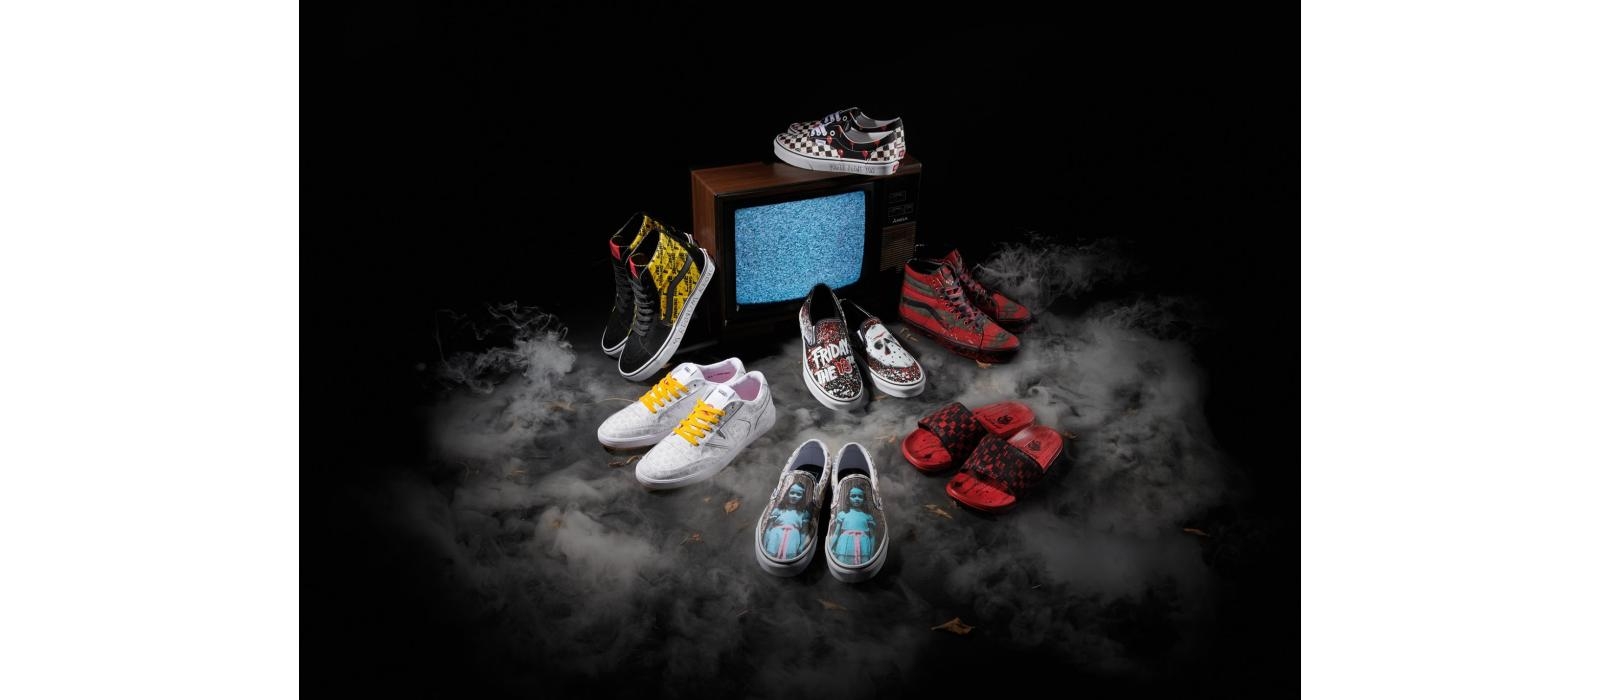 Vans “House of Terror” Collection